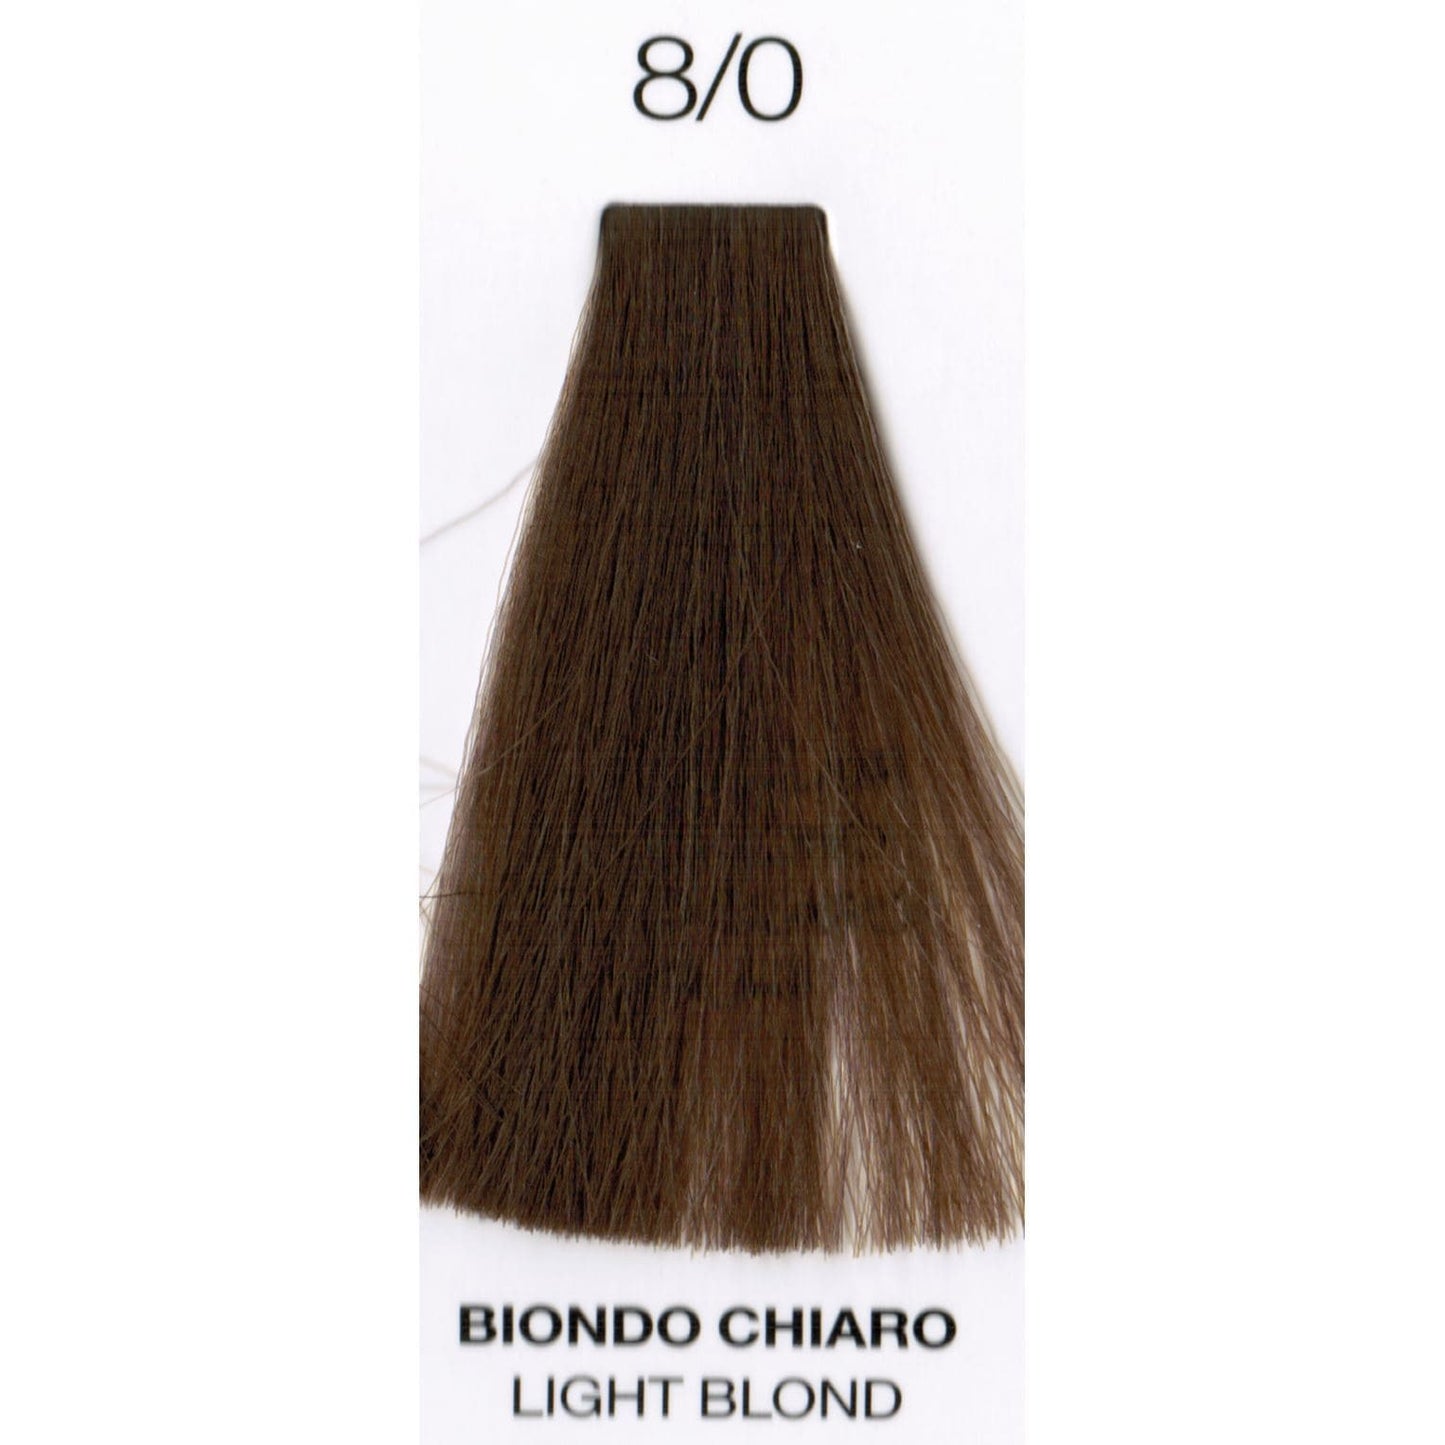 8/0 Light Blonde | Purity | Ammonia-Free Permanent Hair Color HAIR COLOR OYSTER 